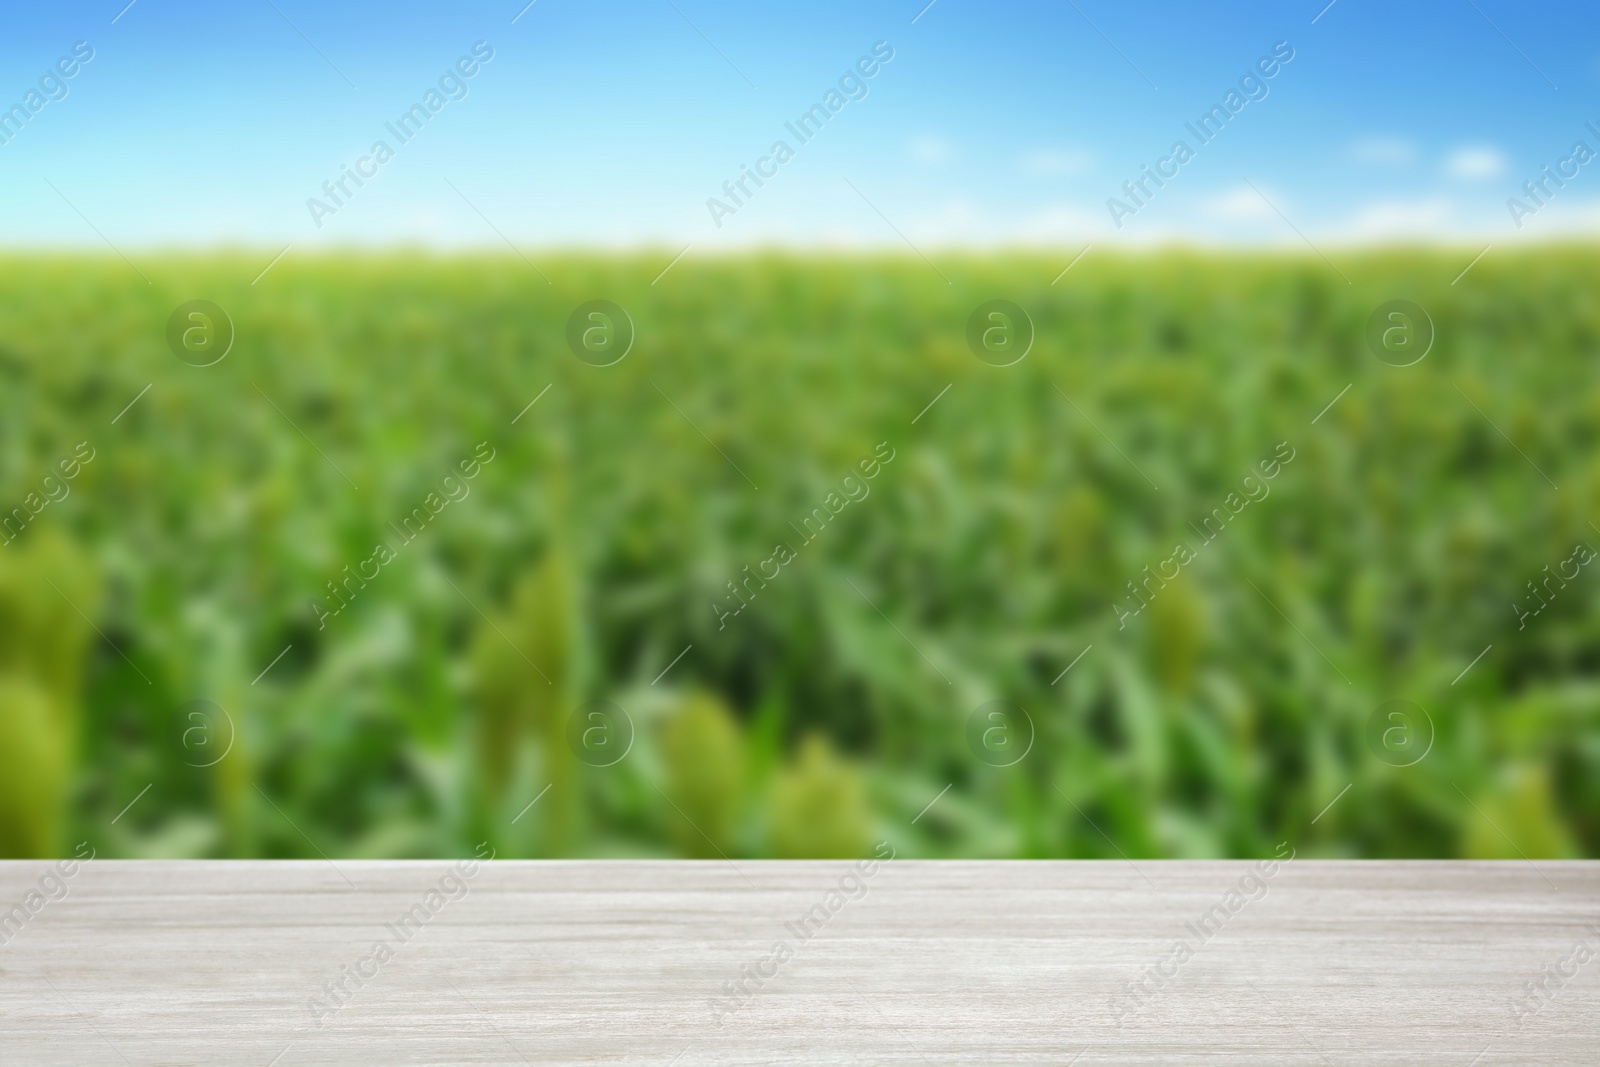 Image of Empty wooden surface and blurred view of green corn plants growing in field. Space for text